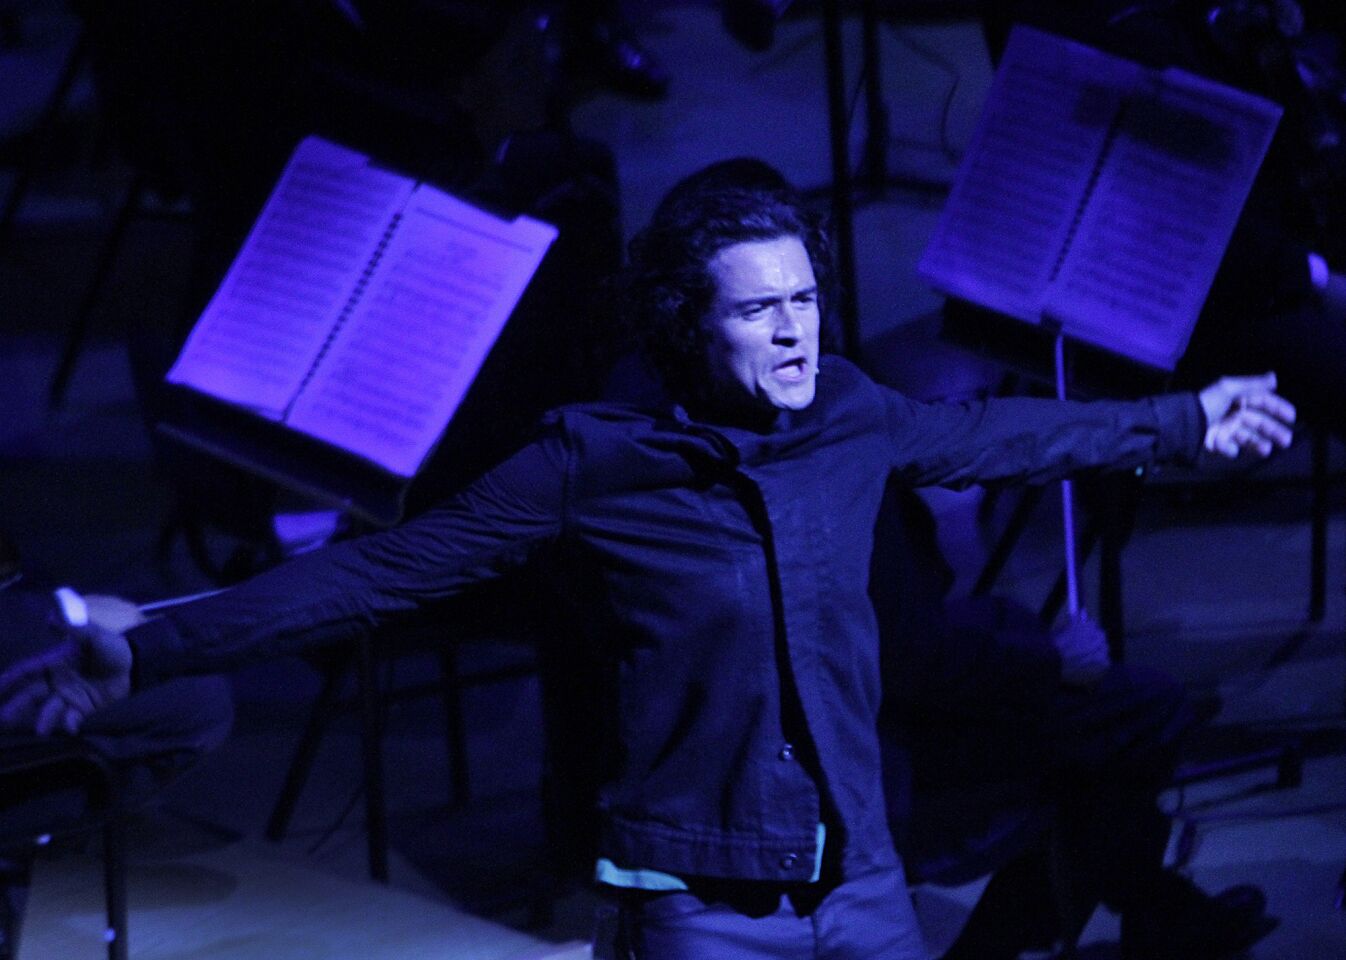 Arts and culture in pictures by The Times | Orlando Bloom